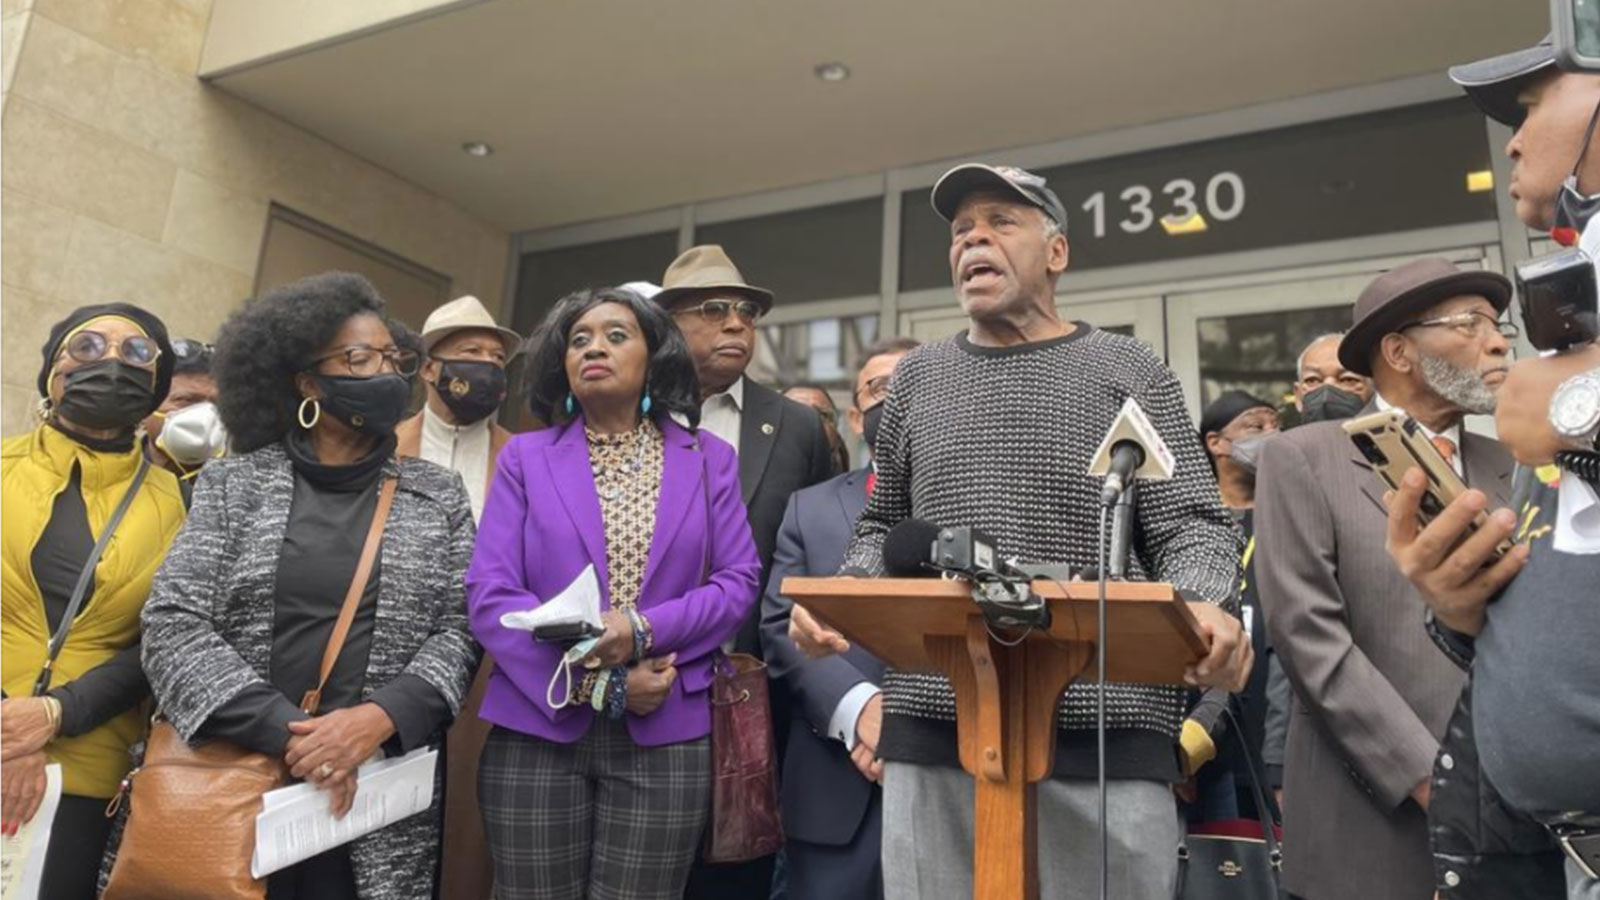 Black leaders in San Francisco urge city to donate historic center back to their community as reparations